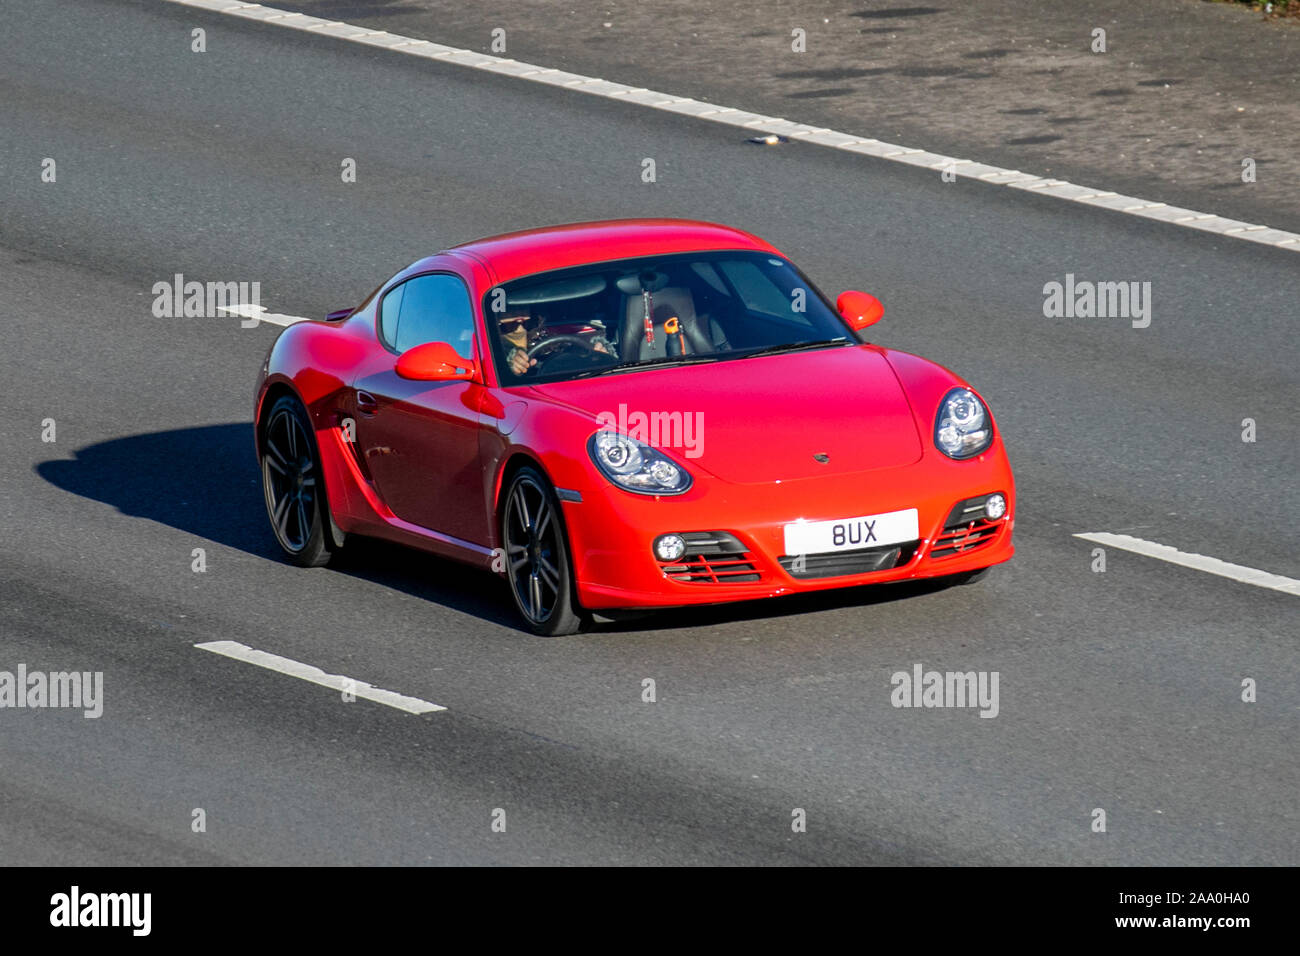 2011 red Porsche Cayman S-A with private number plate, personalised, cherished, dateless, DVLA registration marks, registrations,; UK Vehicular traffic, transport, modern vehicles, saloon cars, south-bound motoring on the 3 lane M6 motorway highway. Stock Photo